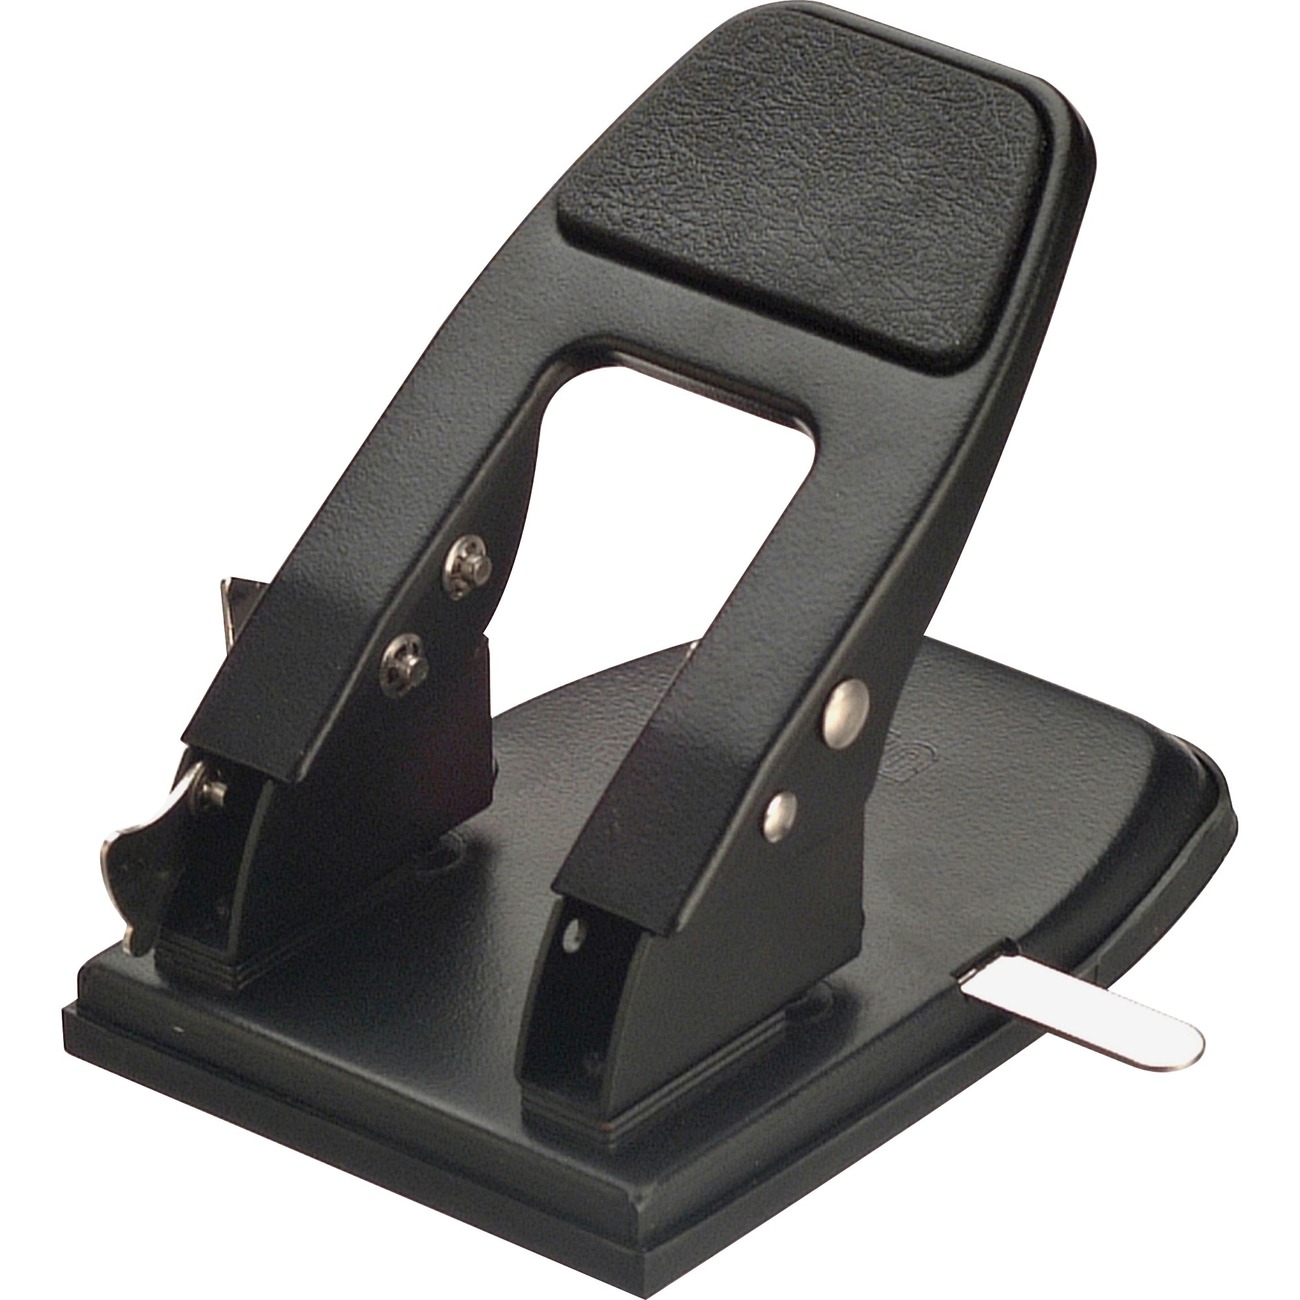 Business Source Electric Adjustable 3-Hole Punch